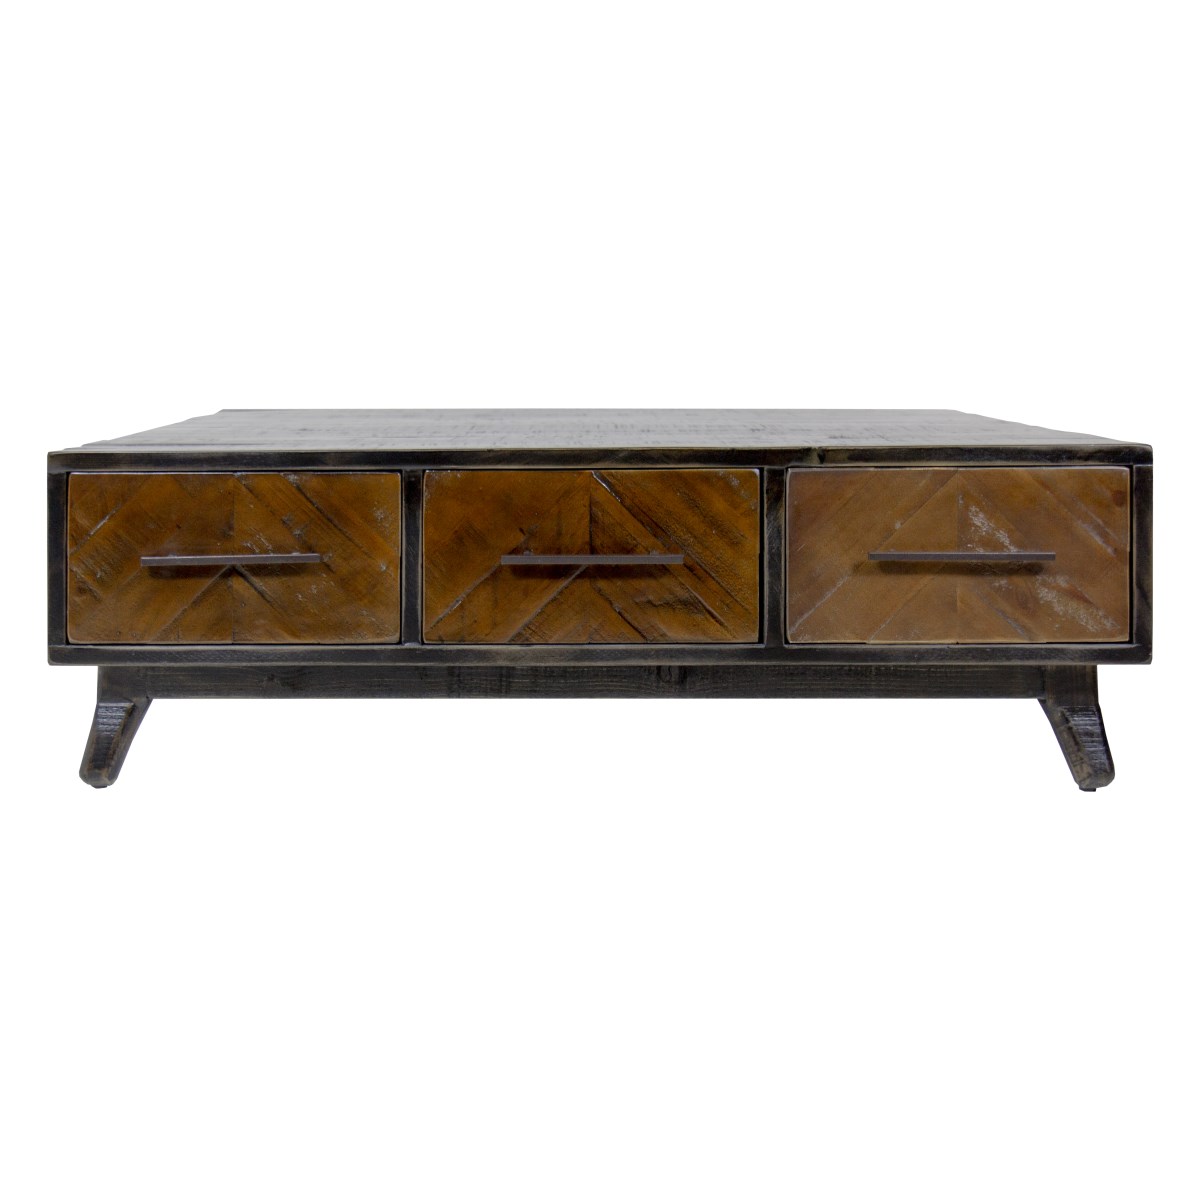 Furniture Source International Emerson Coffee Table with Drawers